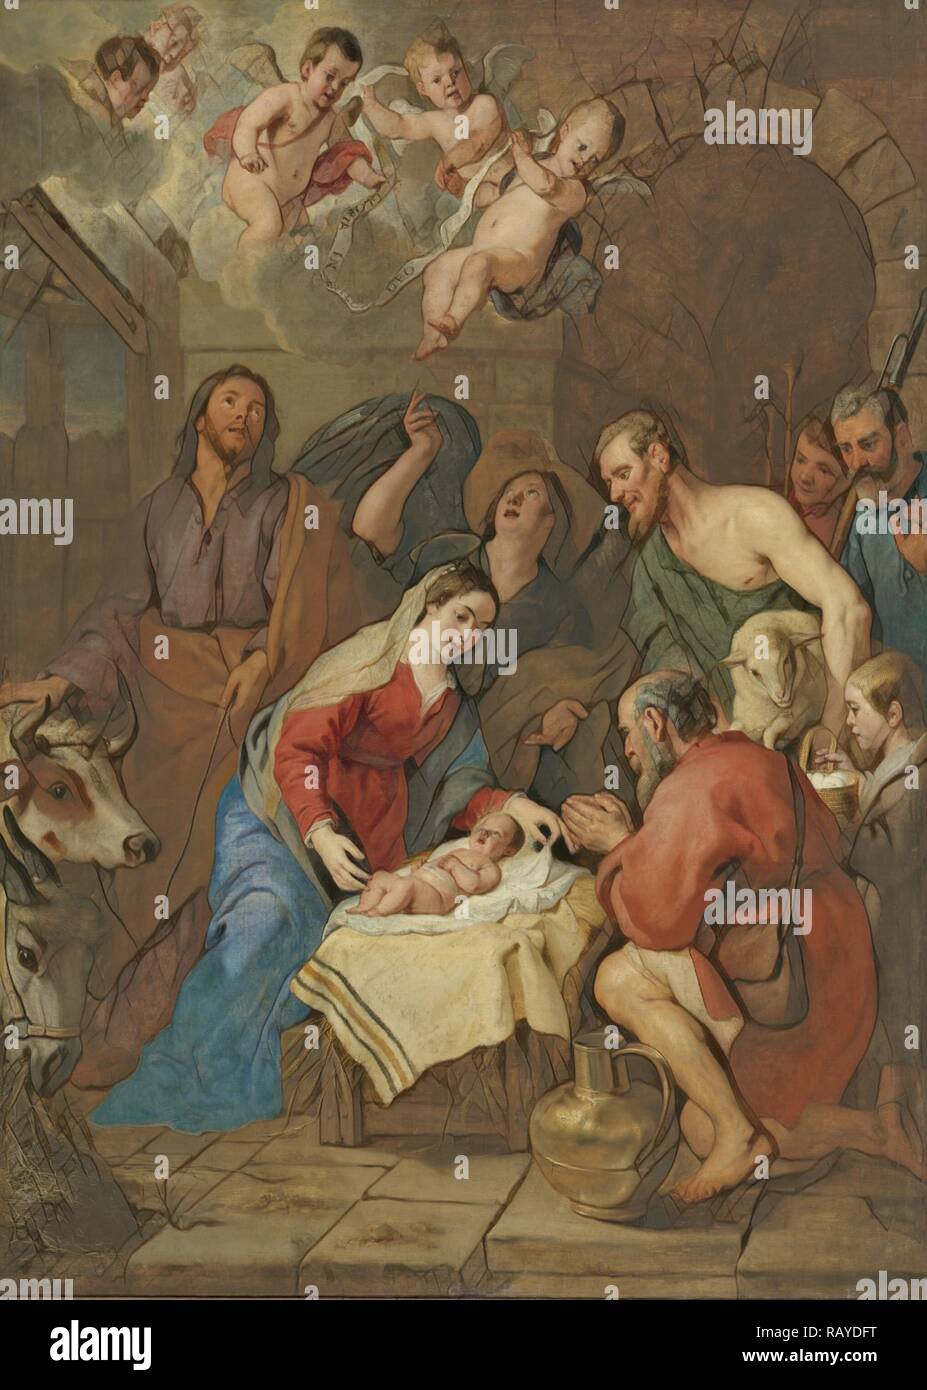 Adoration of the Shepherds, Gaspar de Crayer, 1630 - 1669. Reimagined by Gibon. Classic art with a modern twist reimagined Stock Photo